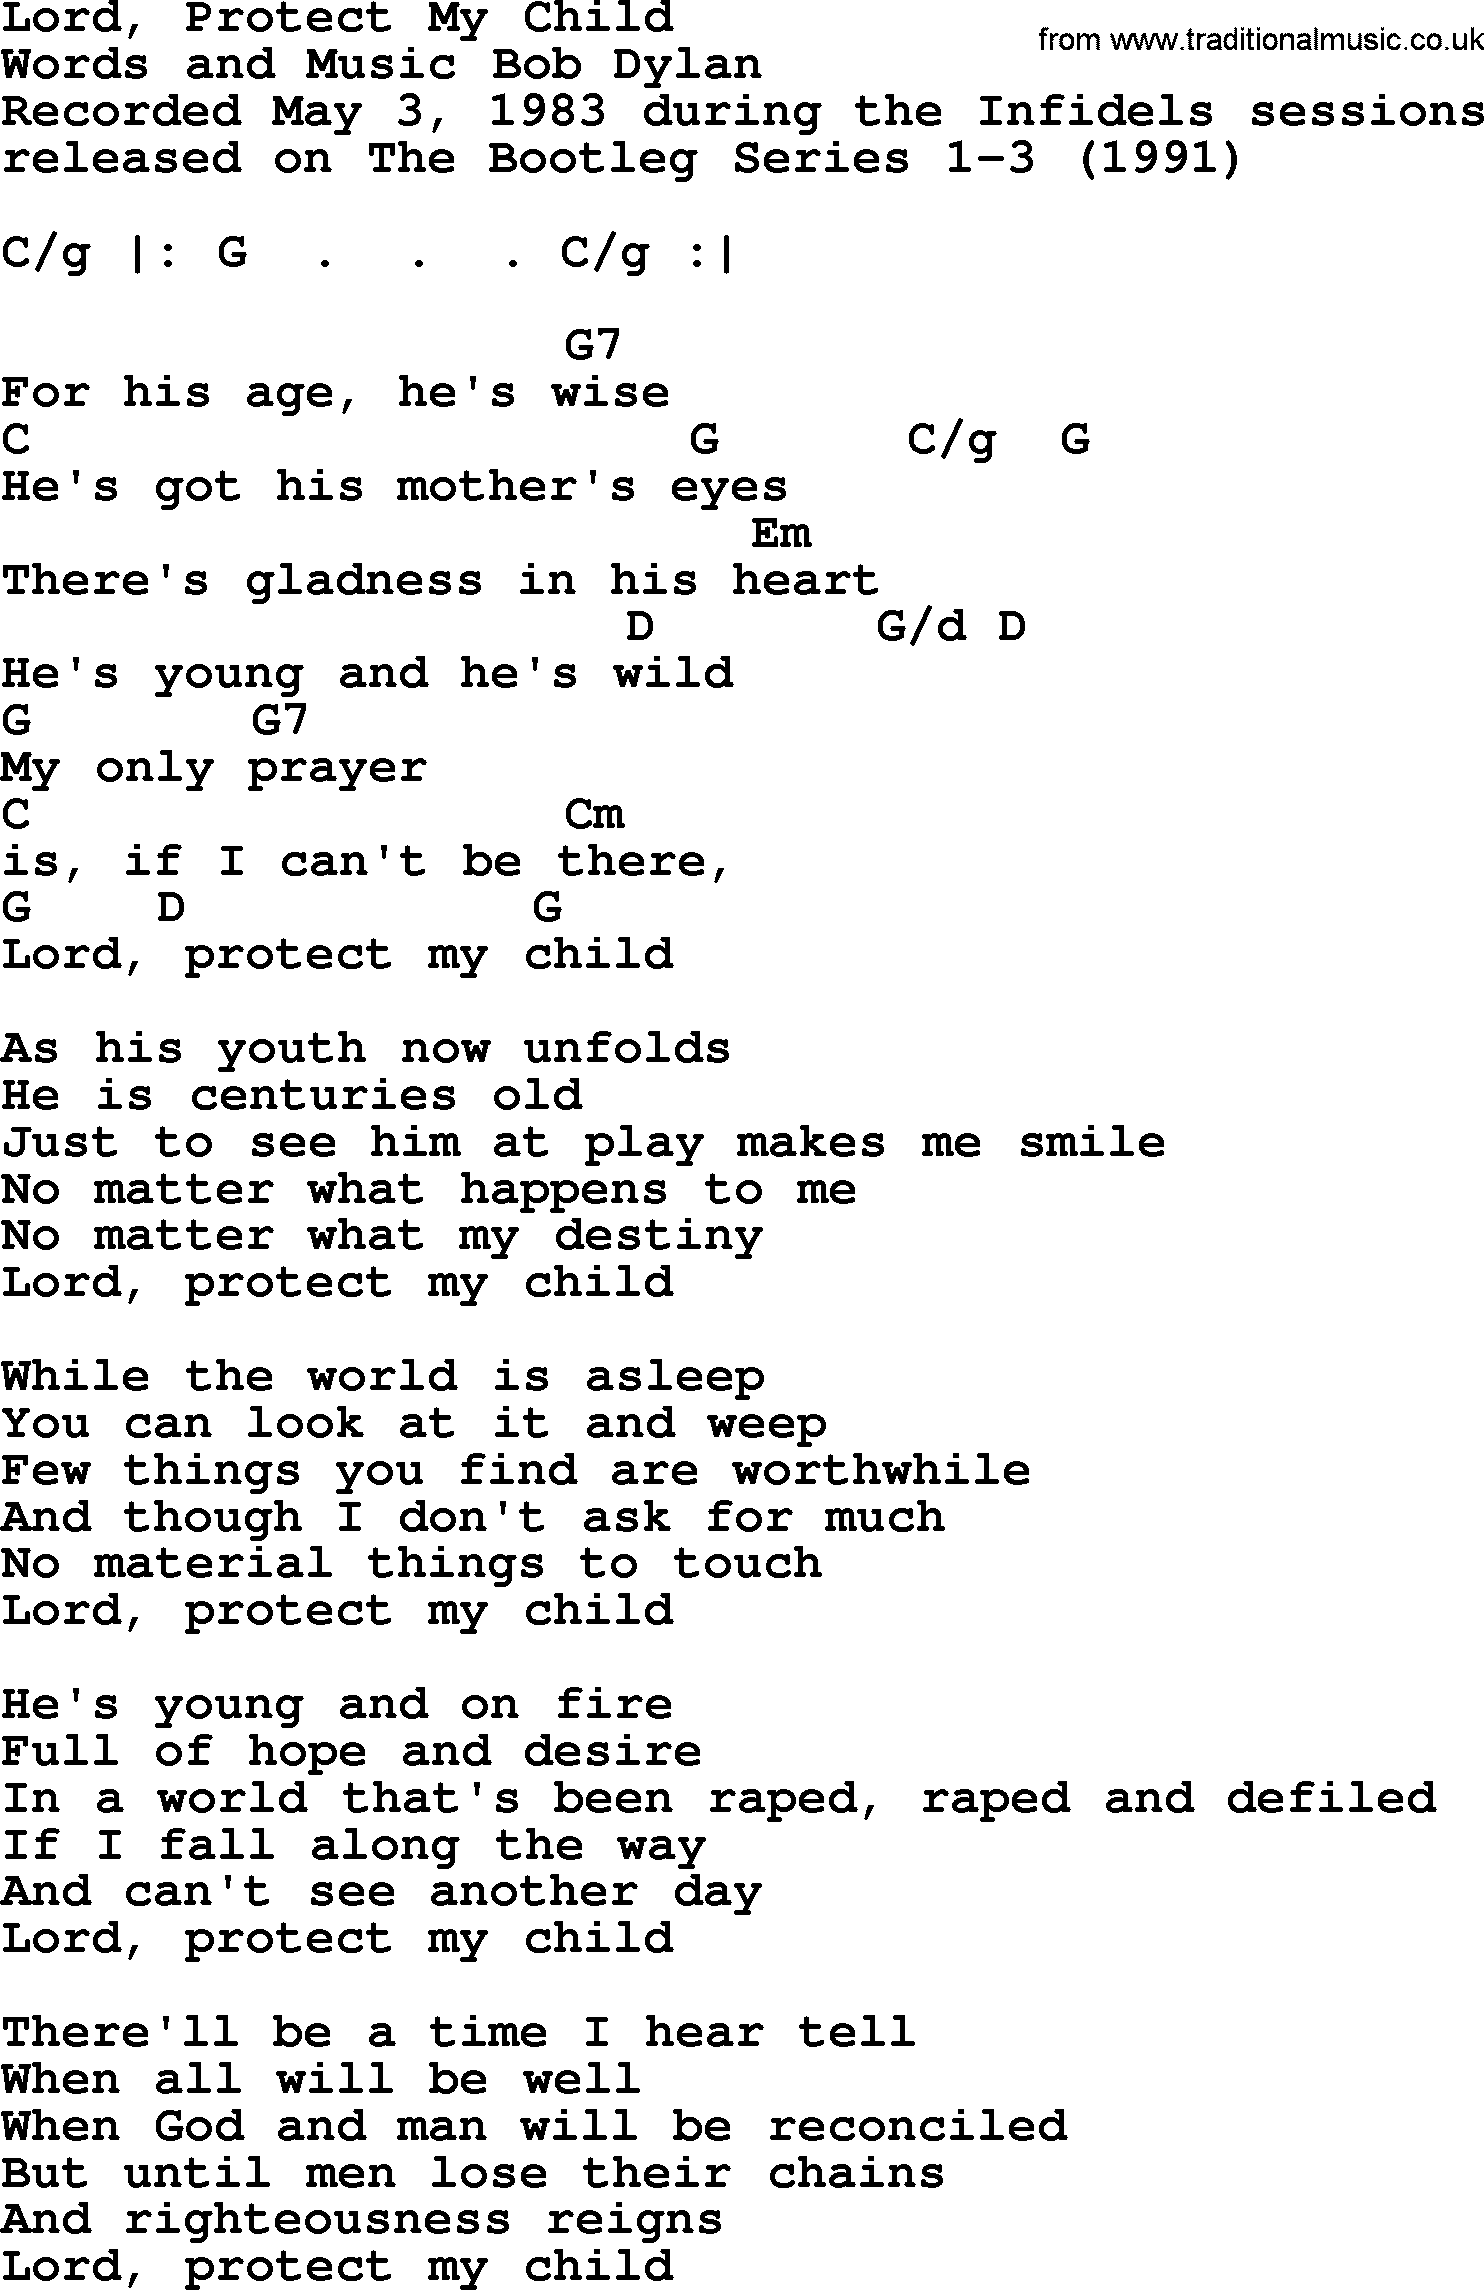 Bob Dylan song, lyrics with chords - Lord, Protect My Child